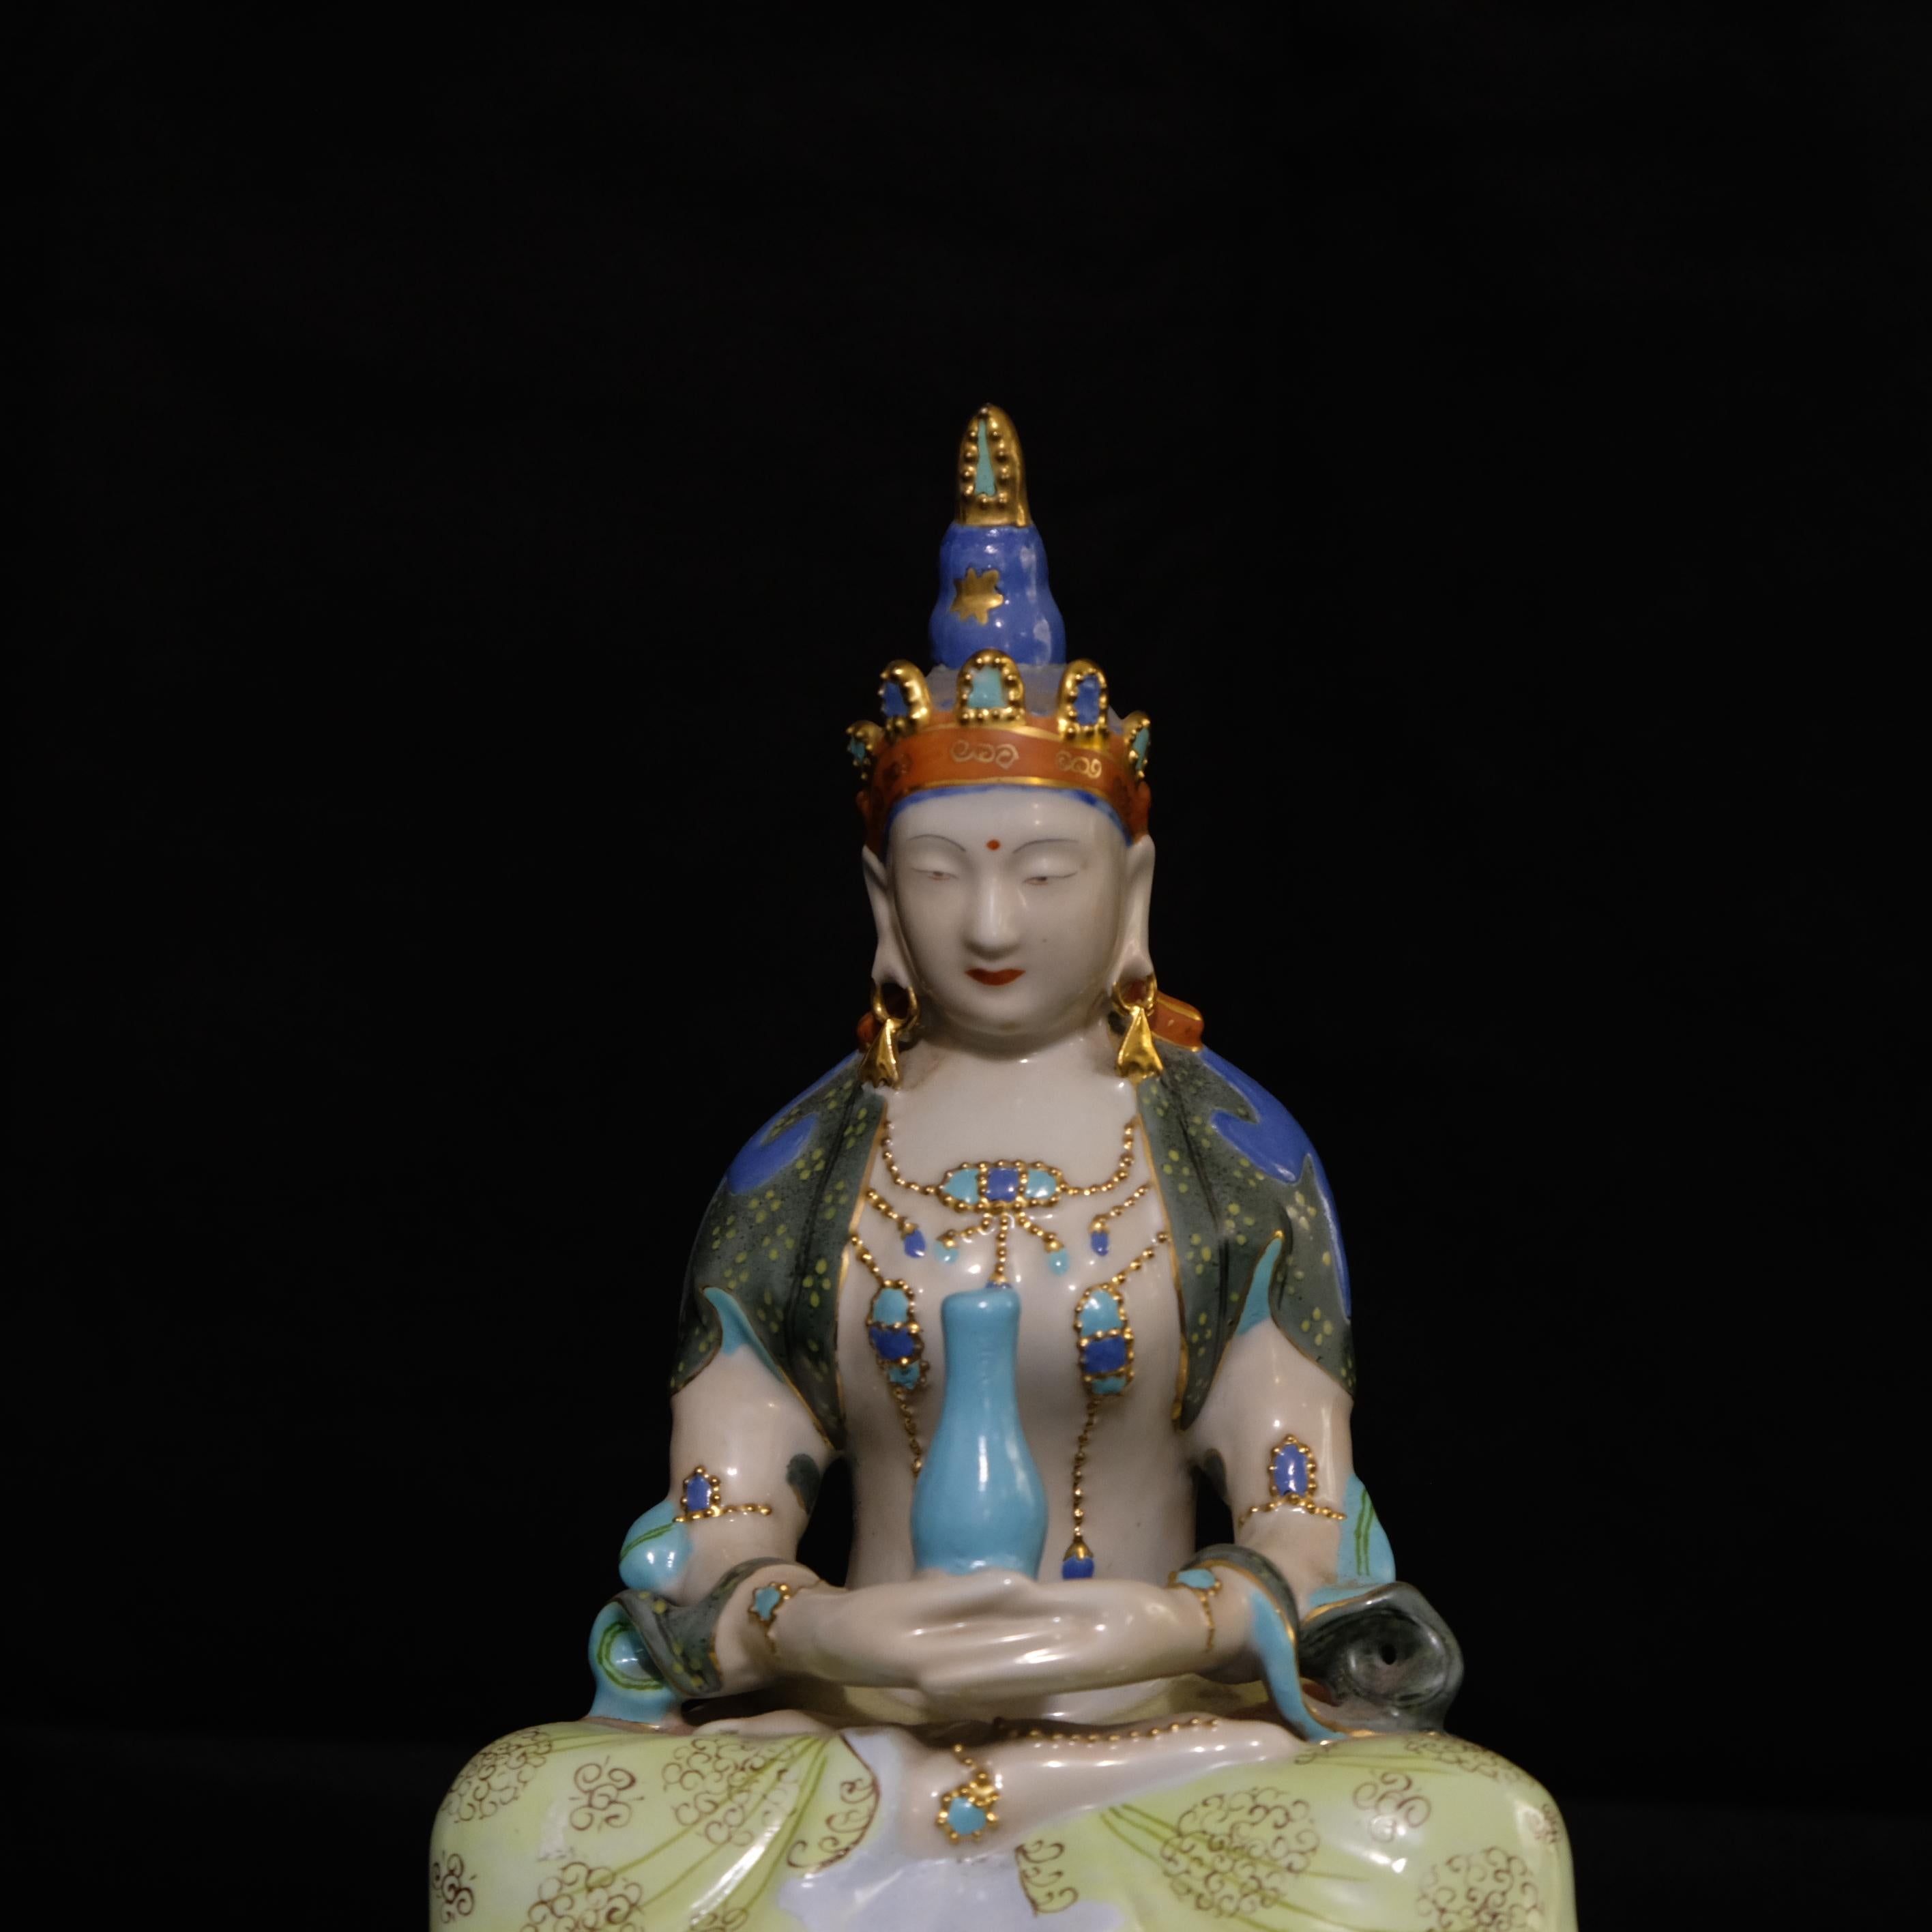 Porcelain figure of The Goddess of Mercy Kuan Yin seated on a lotus base.